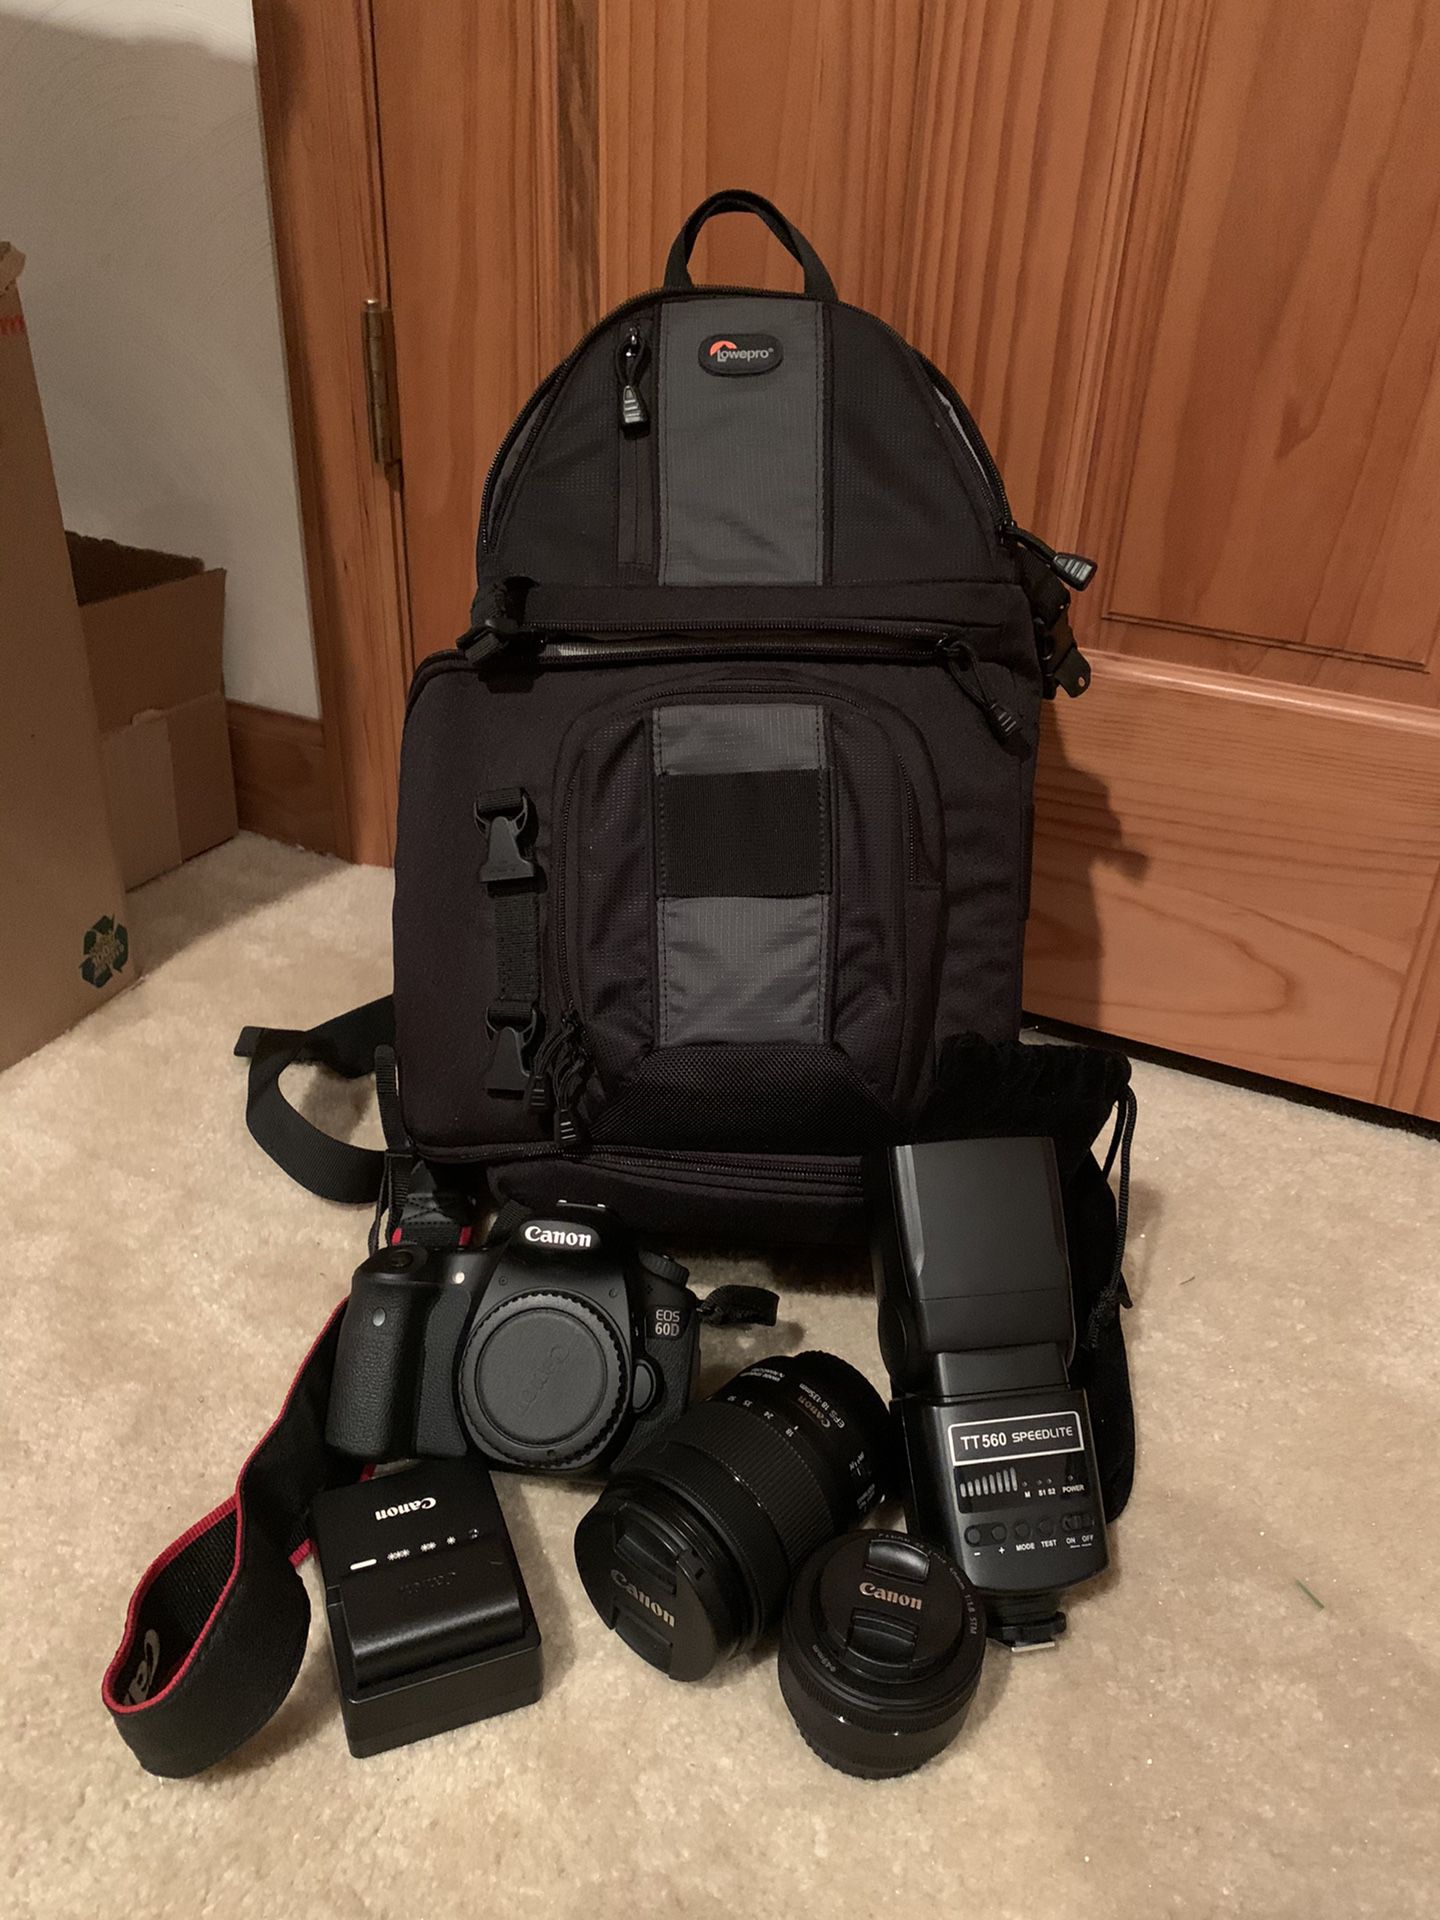 Canon 60D and accessories